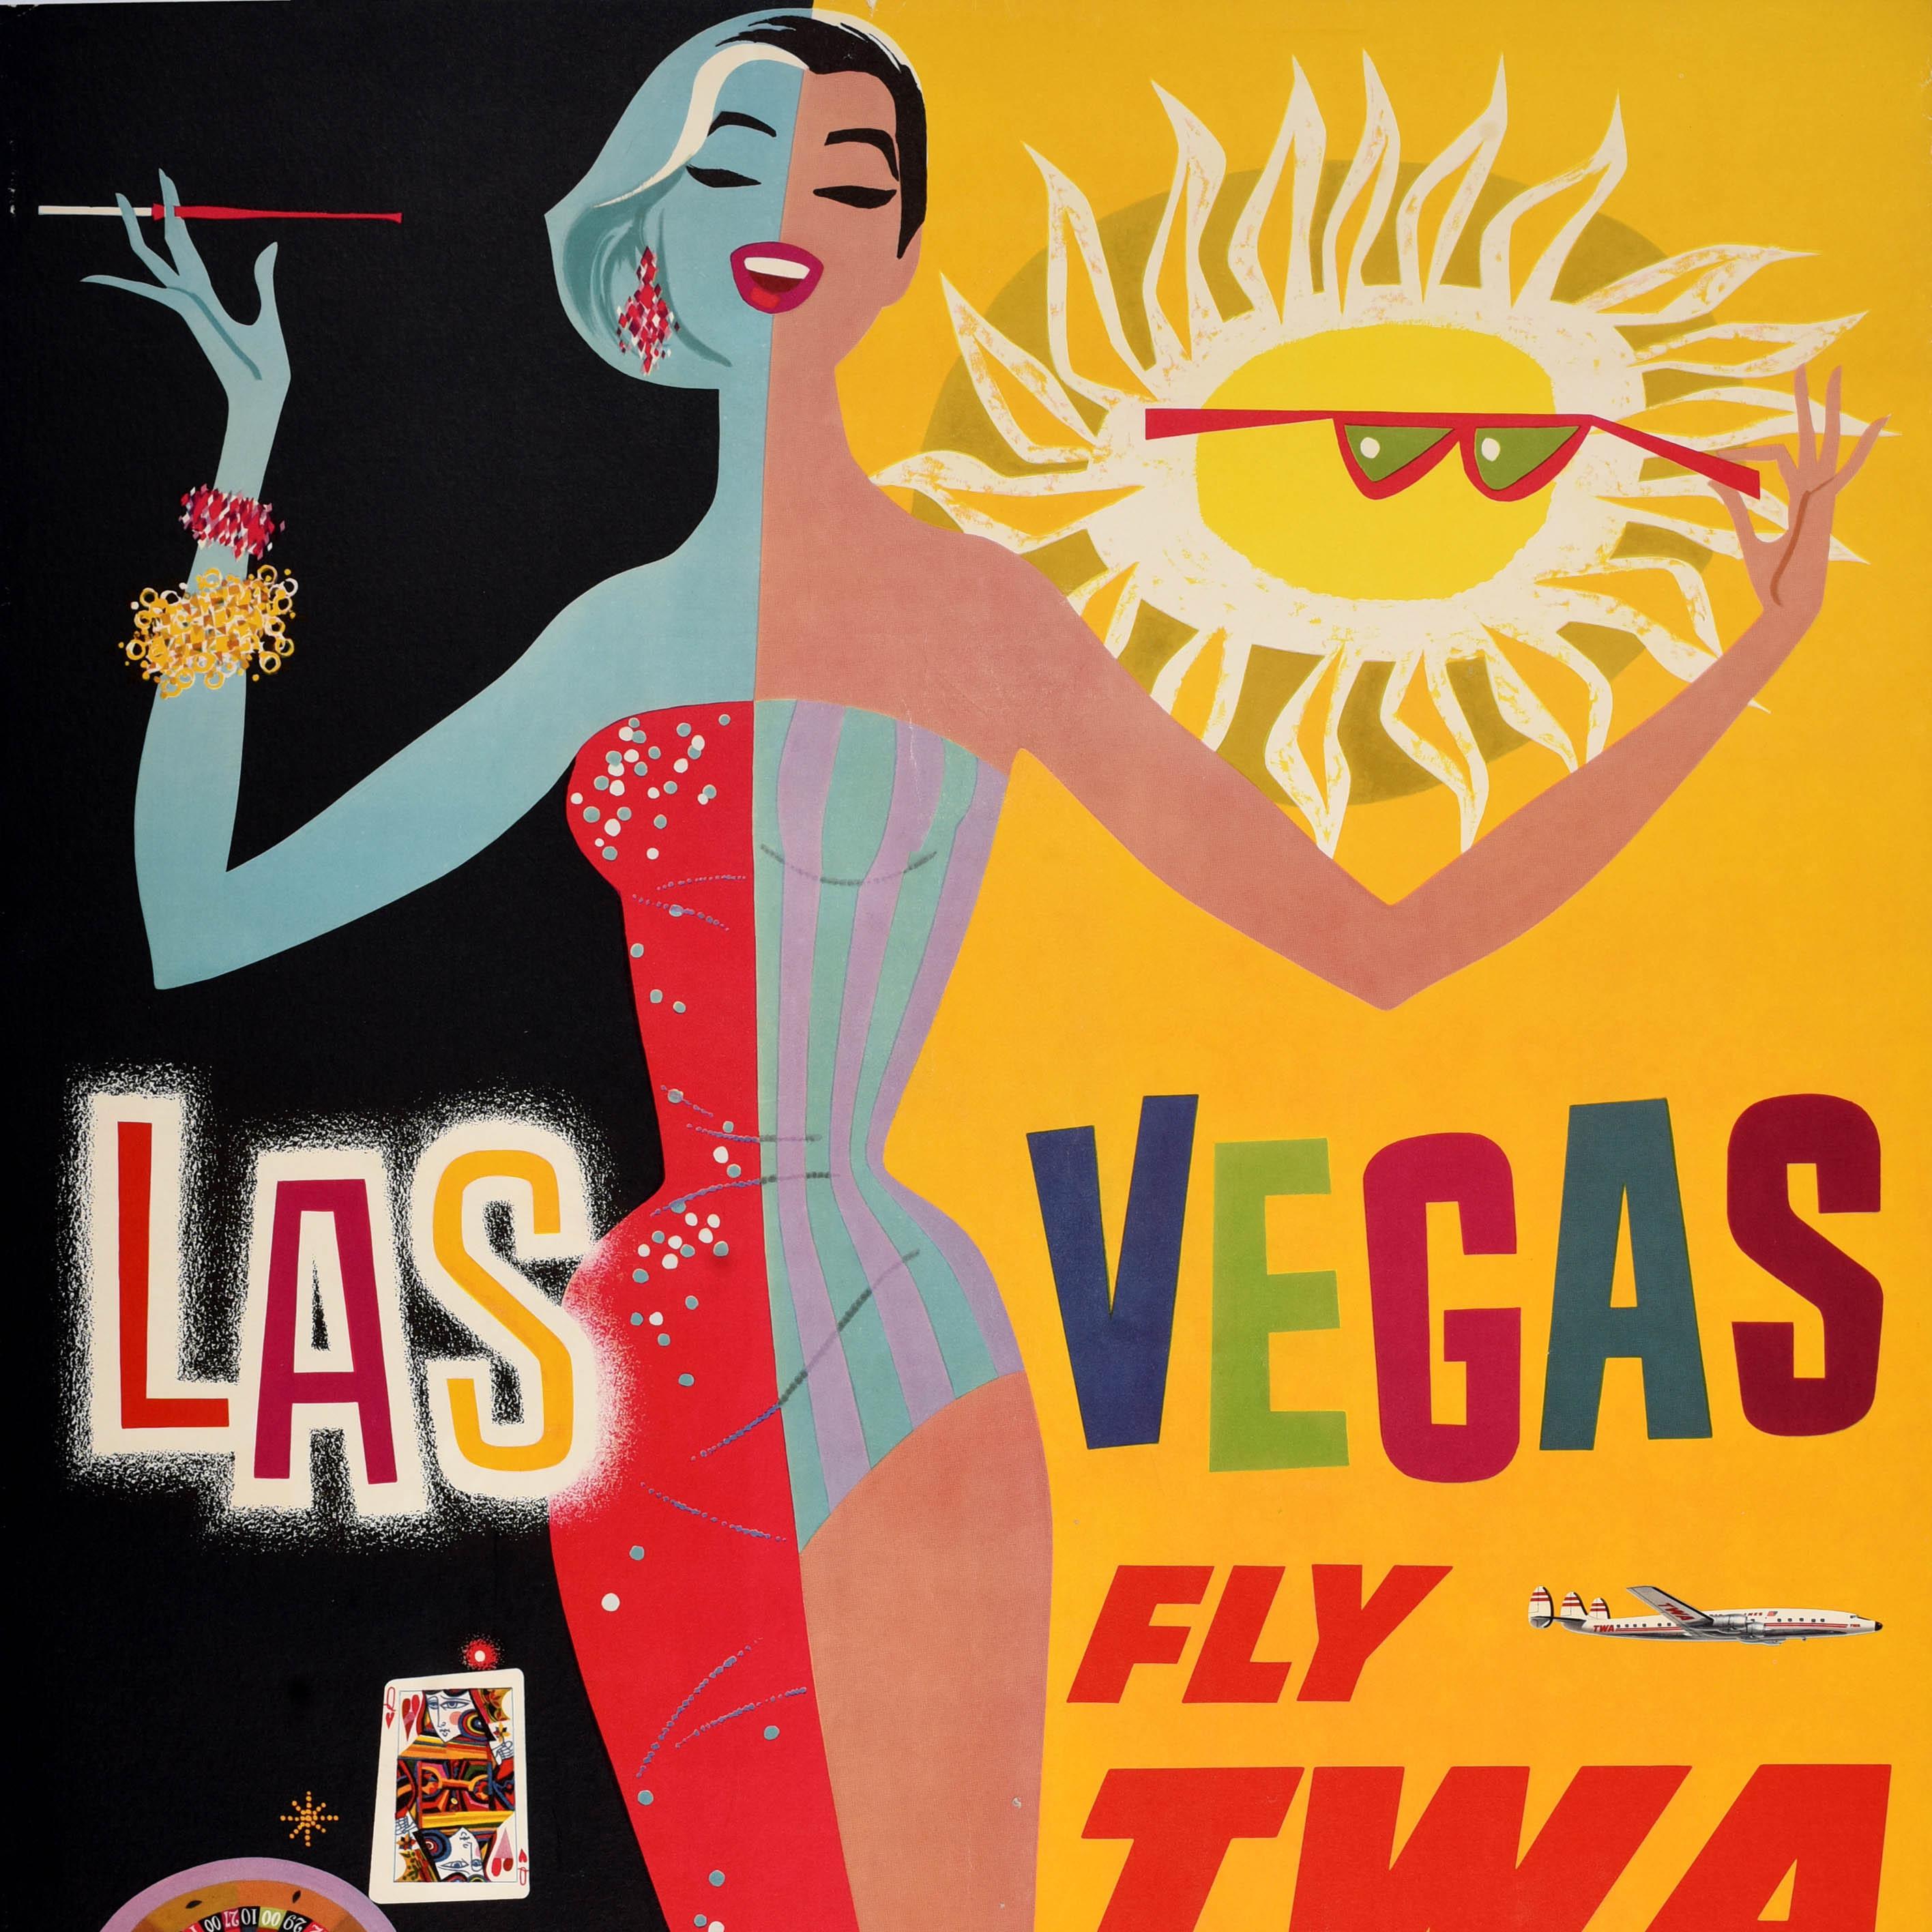 Original vintage mid-century airline travel poster advertising Las Vegas Fly TWA Trans World Airlines featuring a colourful design by the notable American artist David Klein (1918-2005) depicting a smiling elegant lady enjoying Las Vegas at night